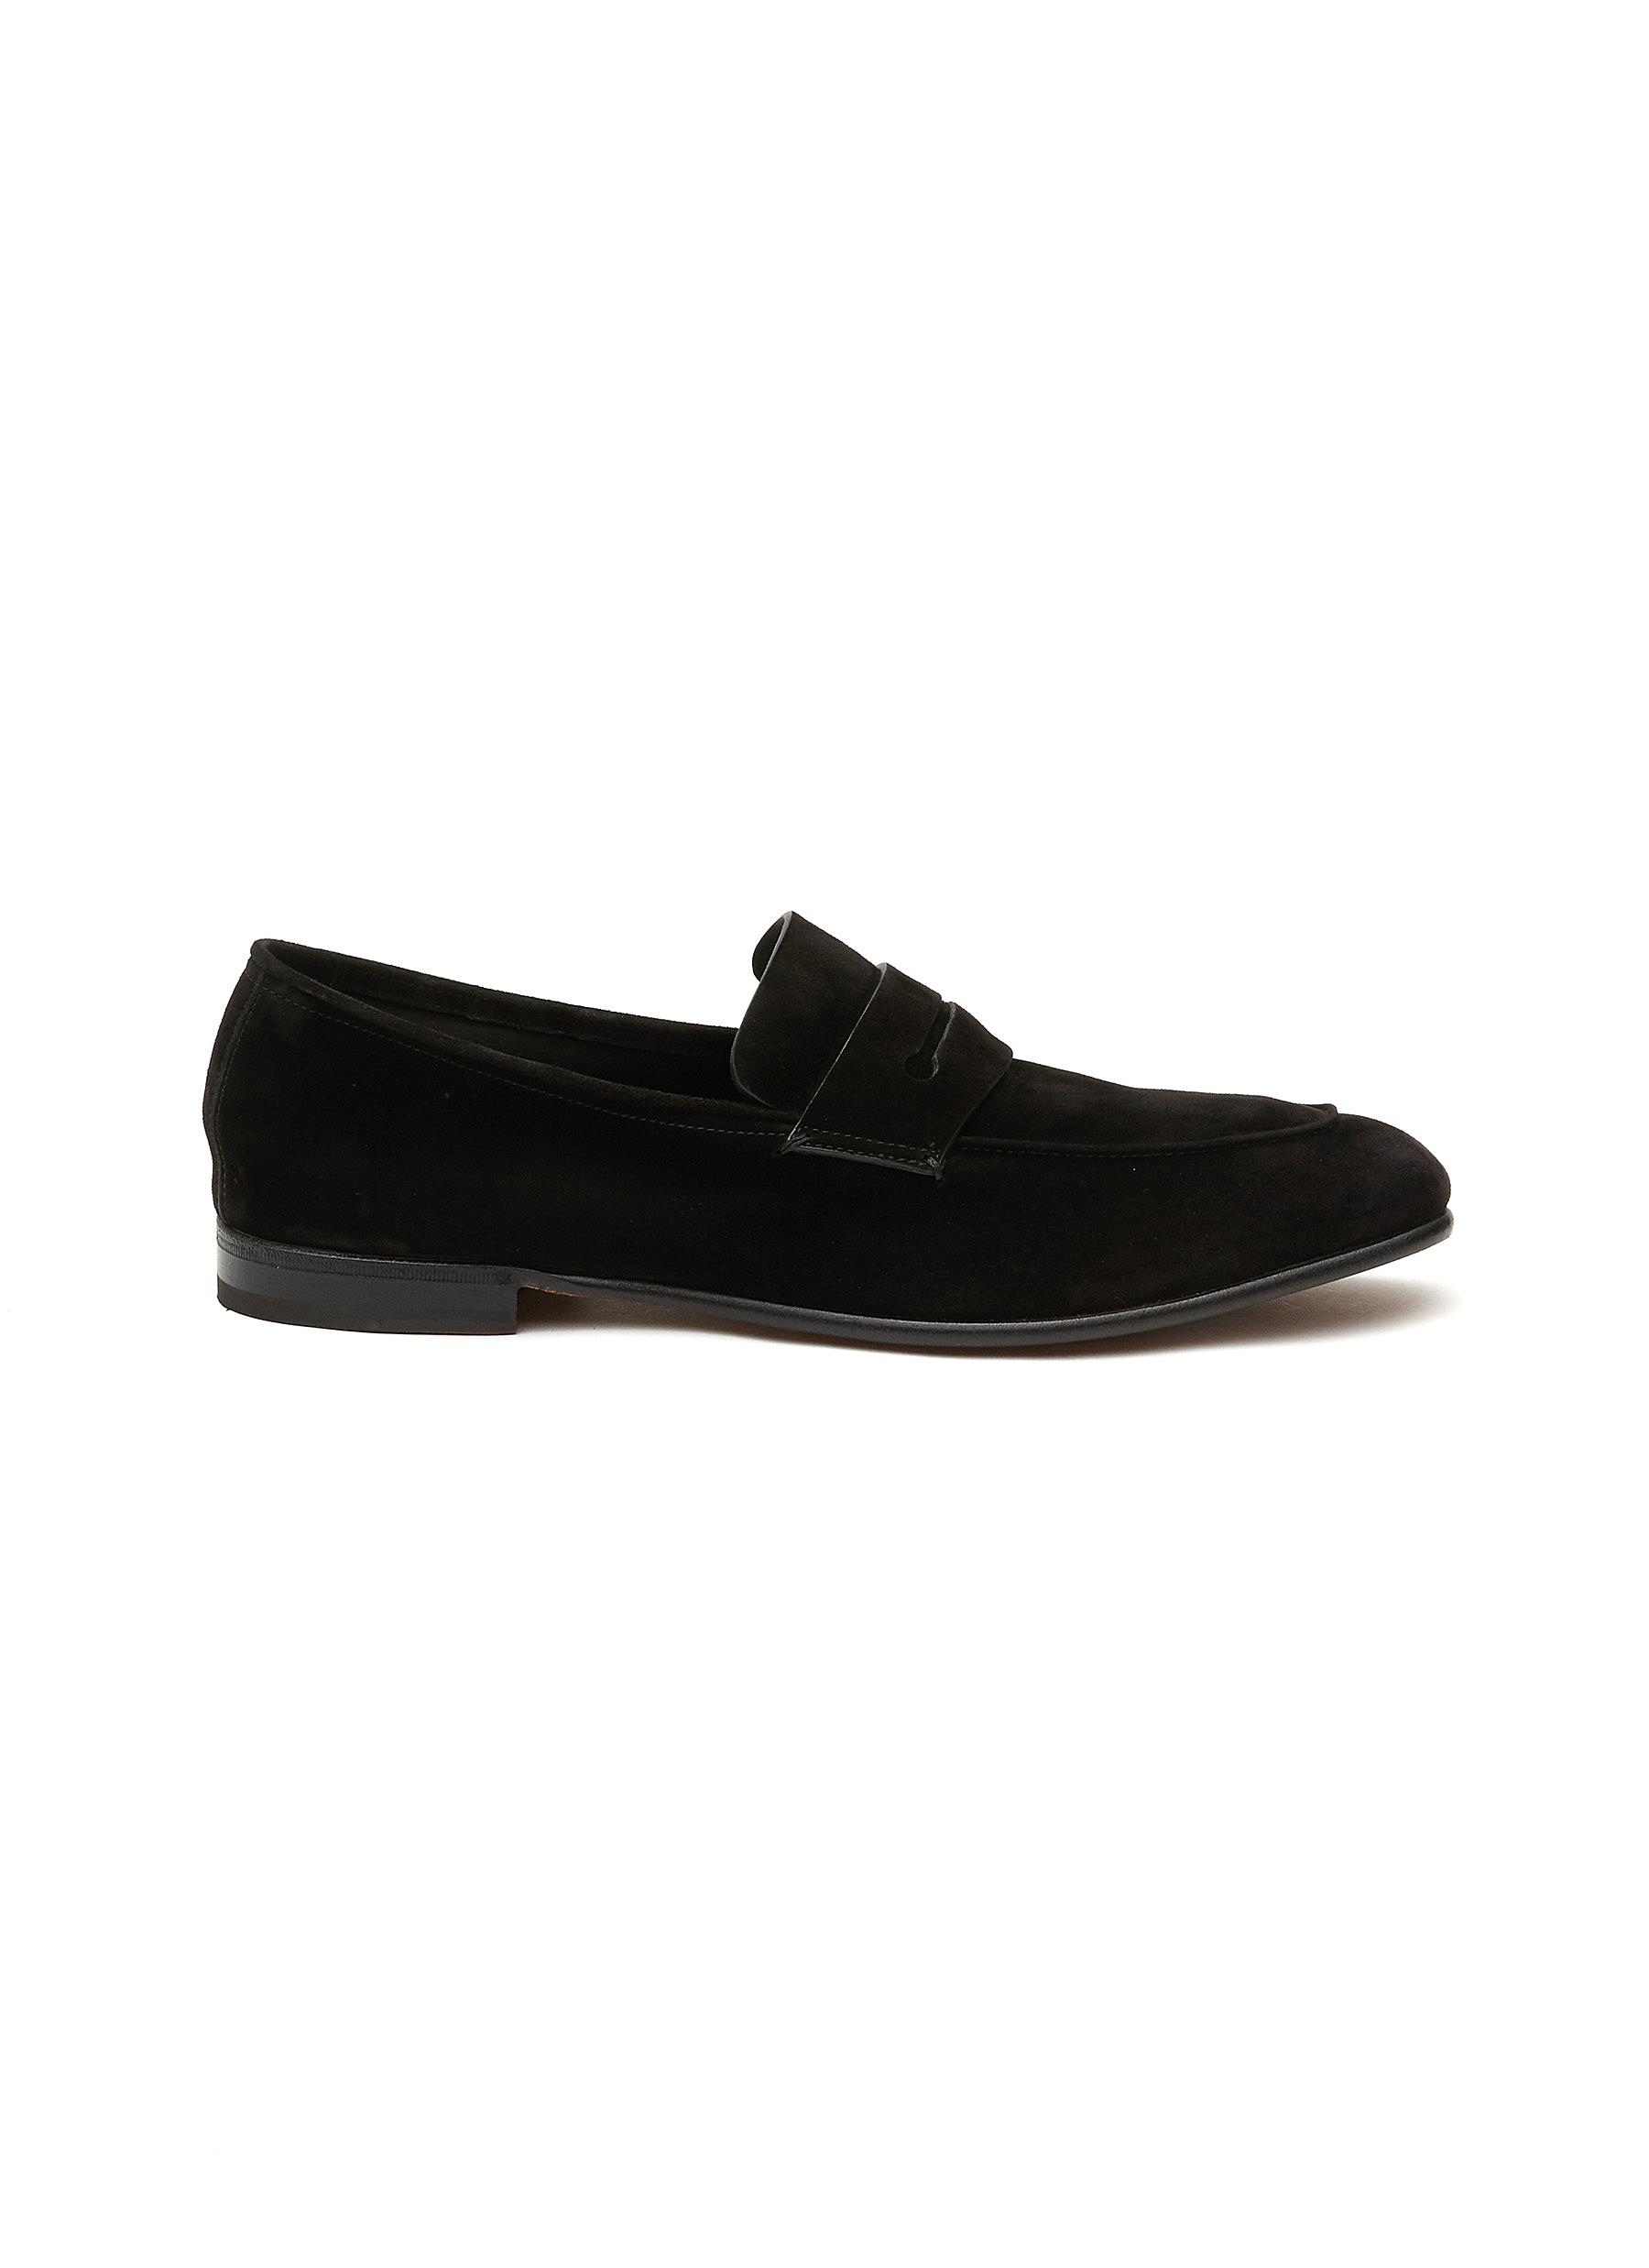 'L'ASOLA' SUEDE LOAFERS